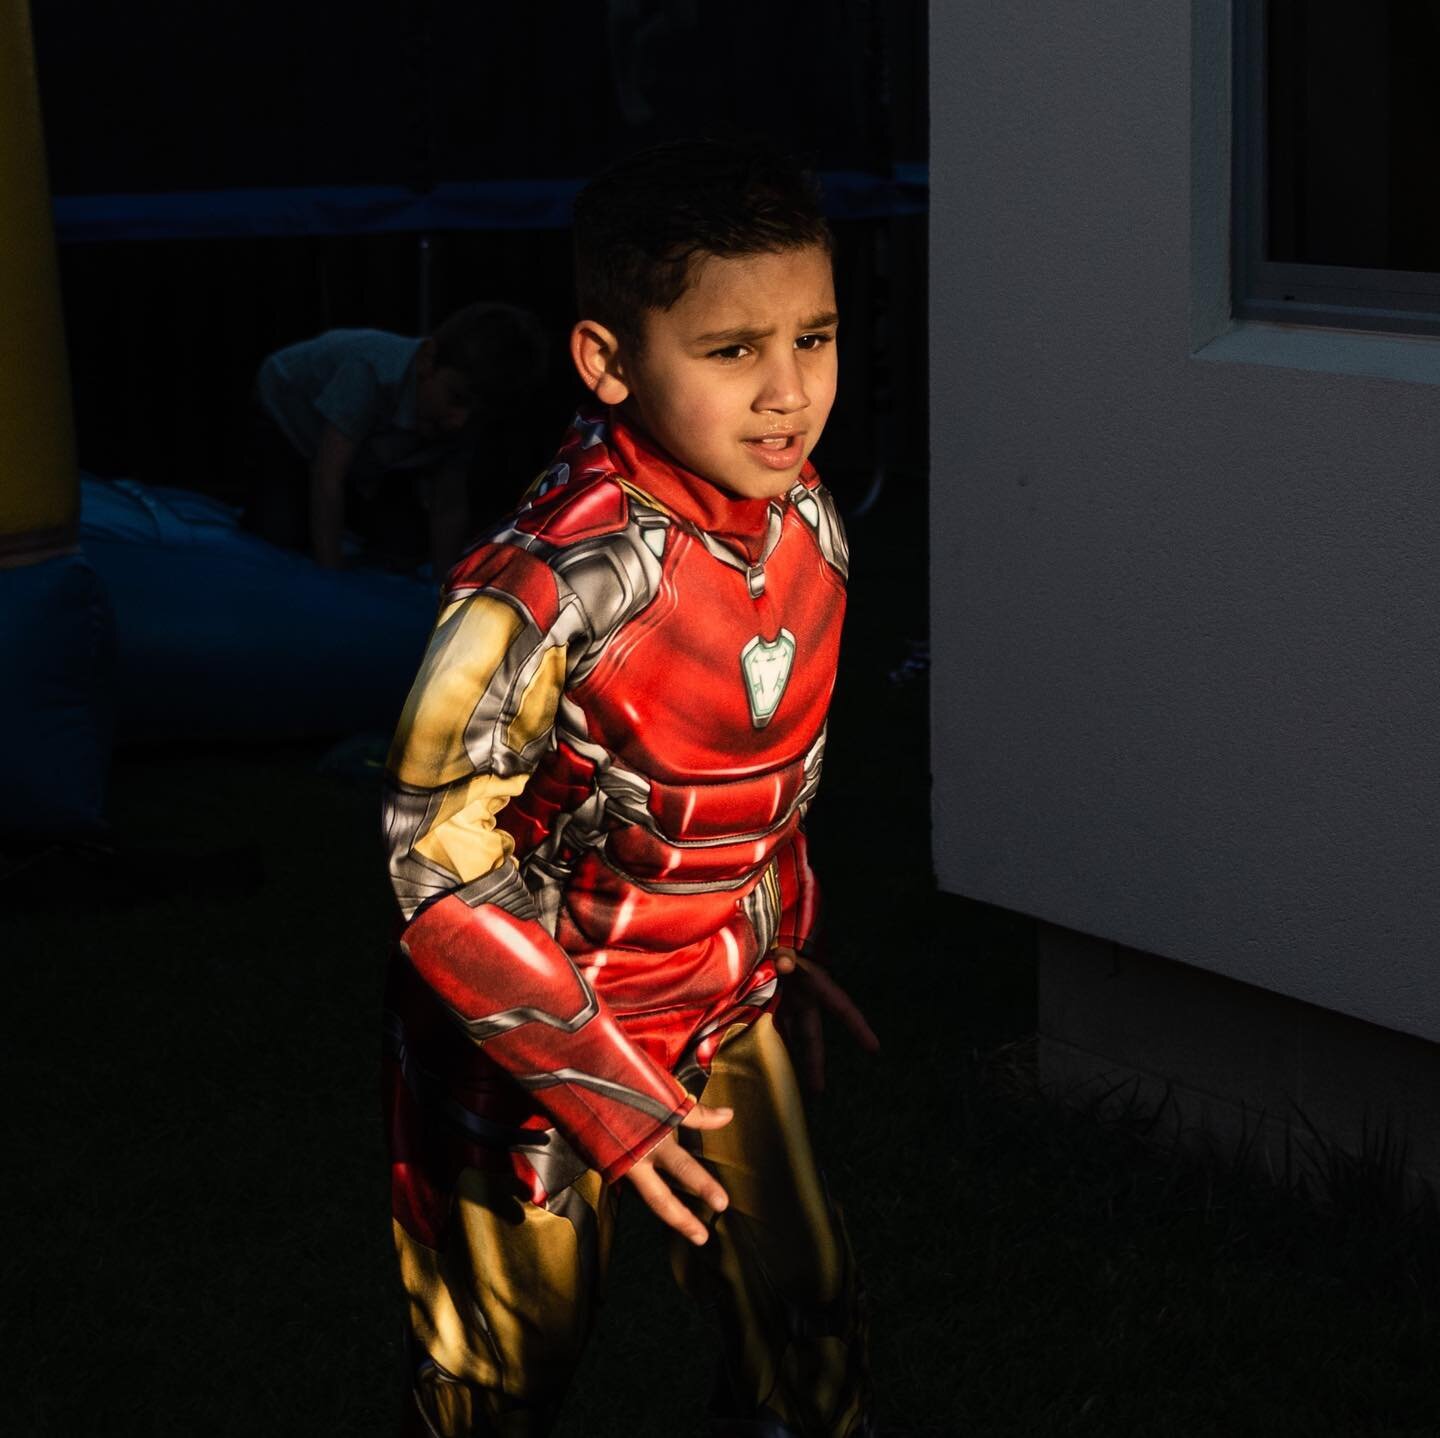 Shaby the Superhero, celebrating his 5th birthday in awesome style!